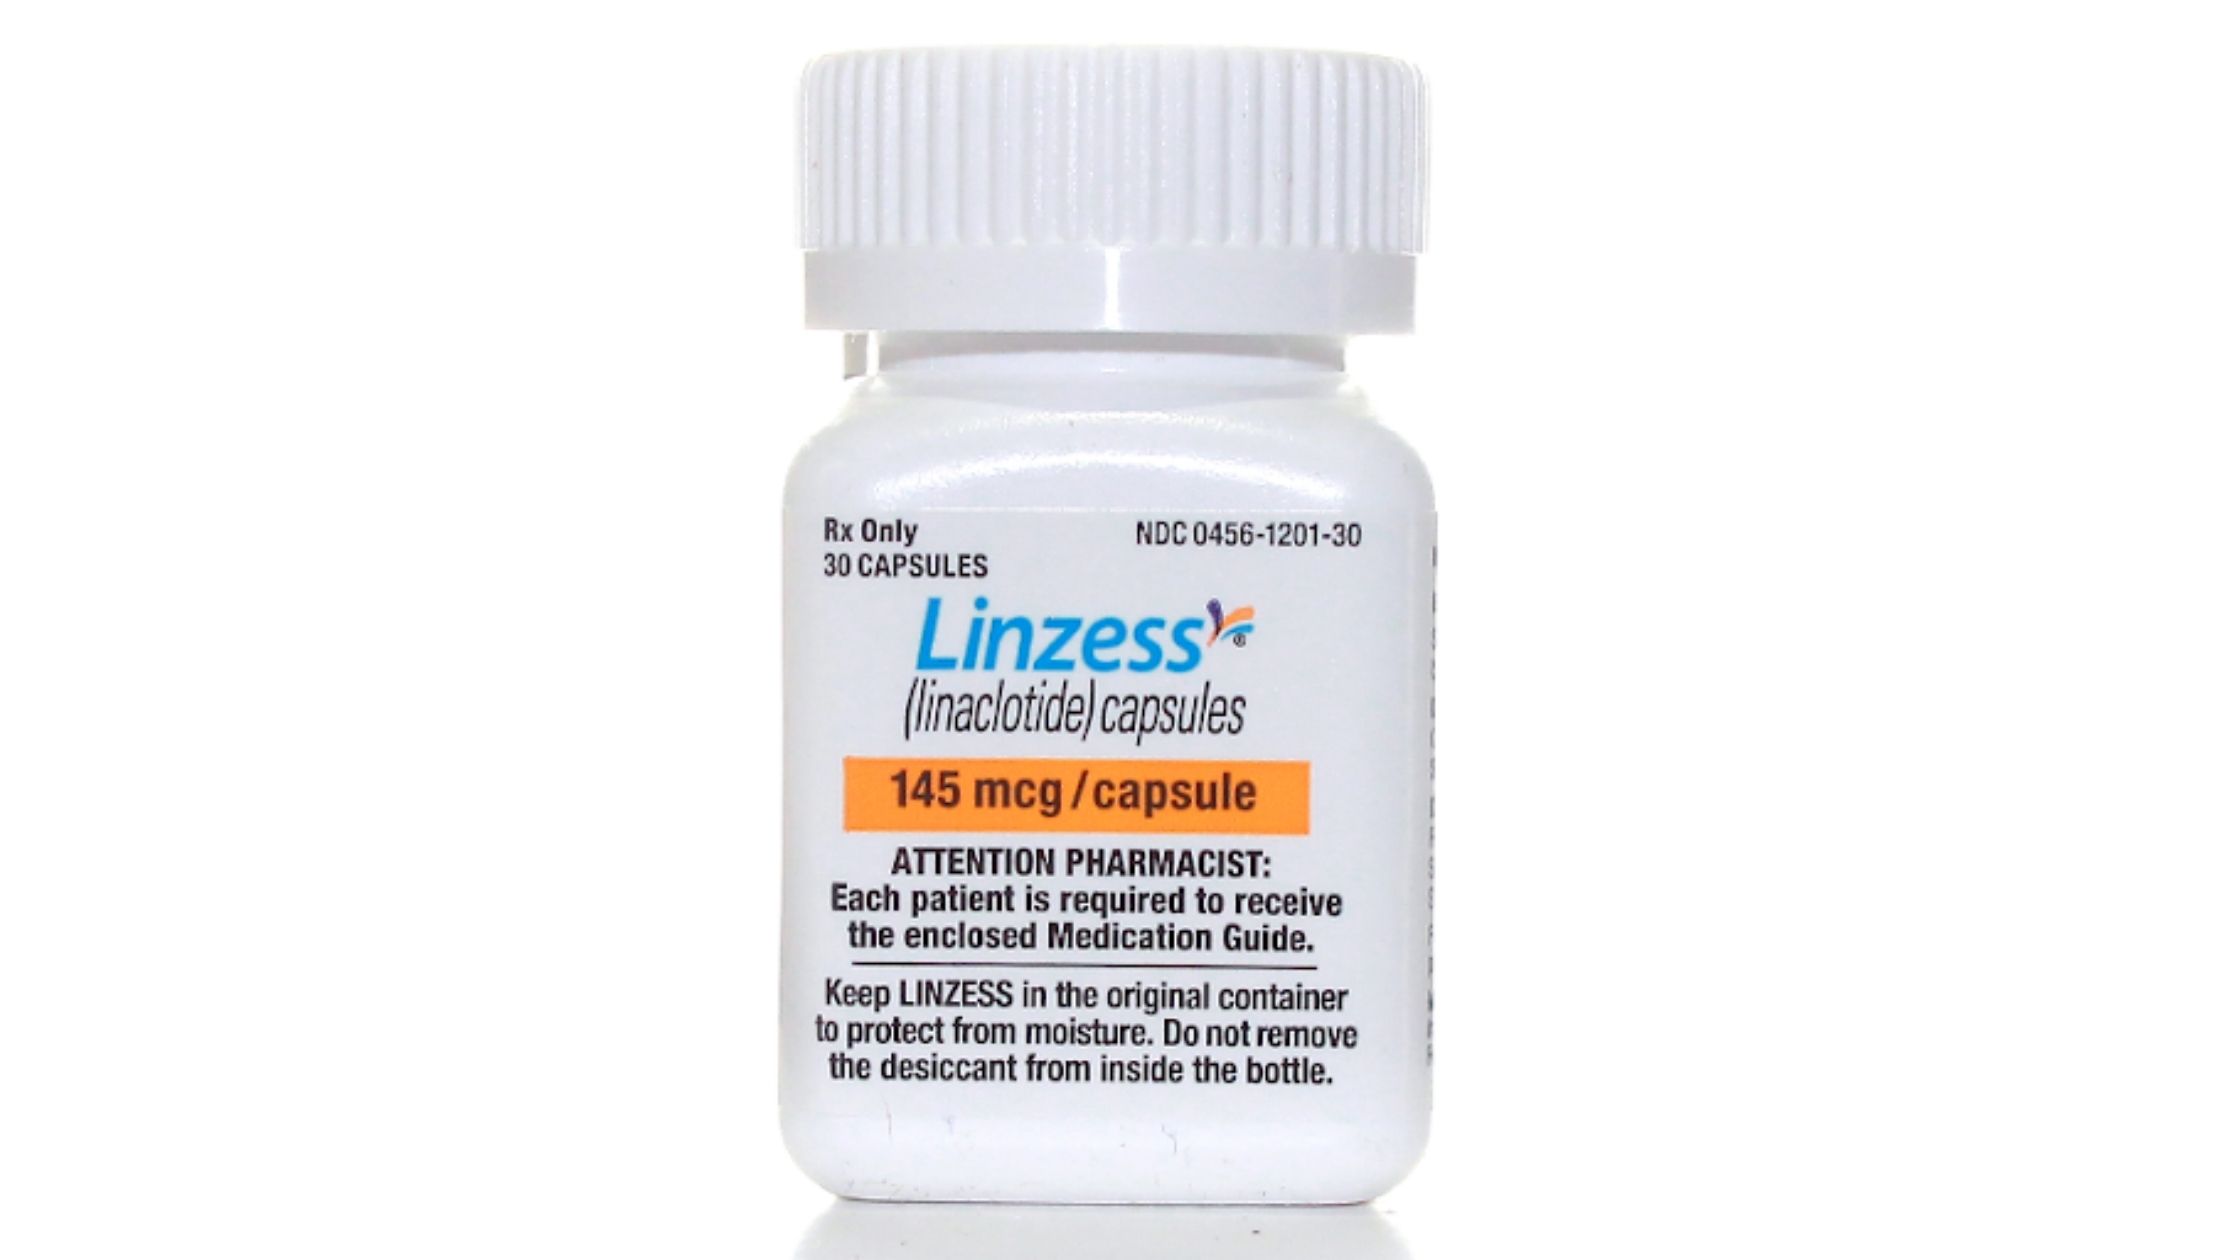 How To Use Linzess For Weight Loss